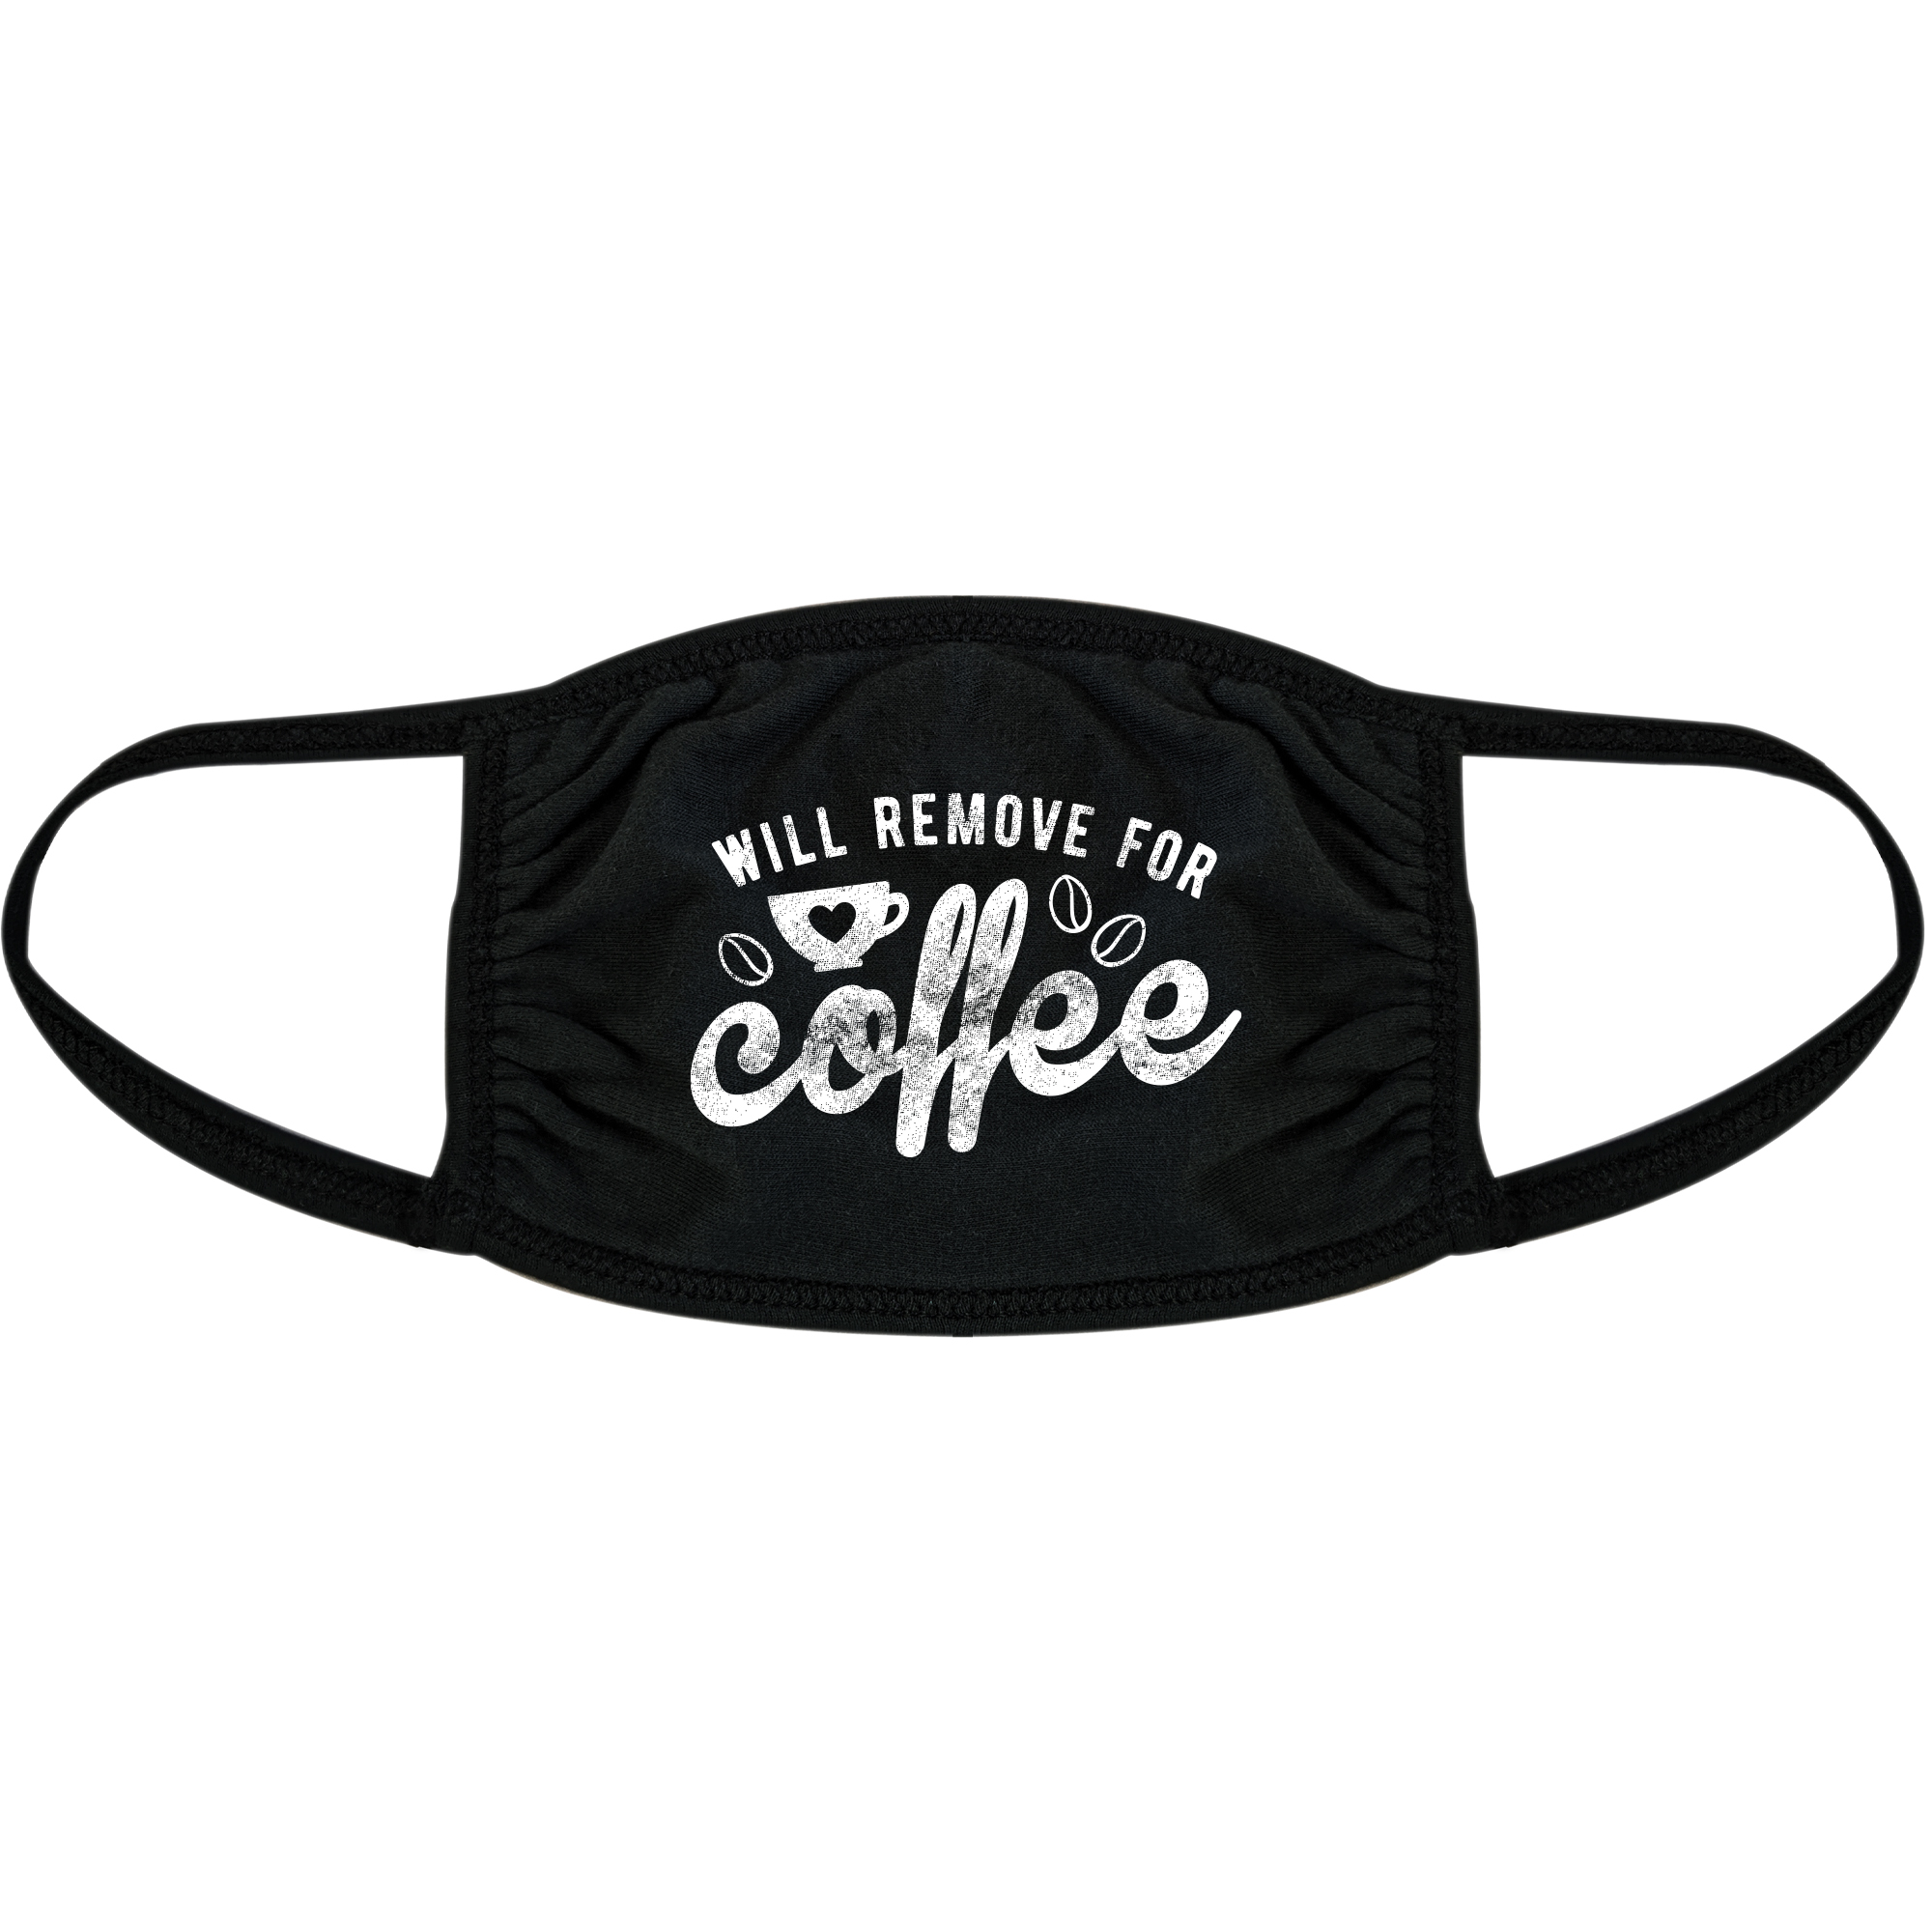 Will Remove For Coffee Face Mask Funny Caffeine Morning Graphic Nose And Mouth Covering - image 1 of 6